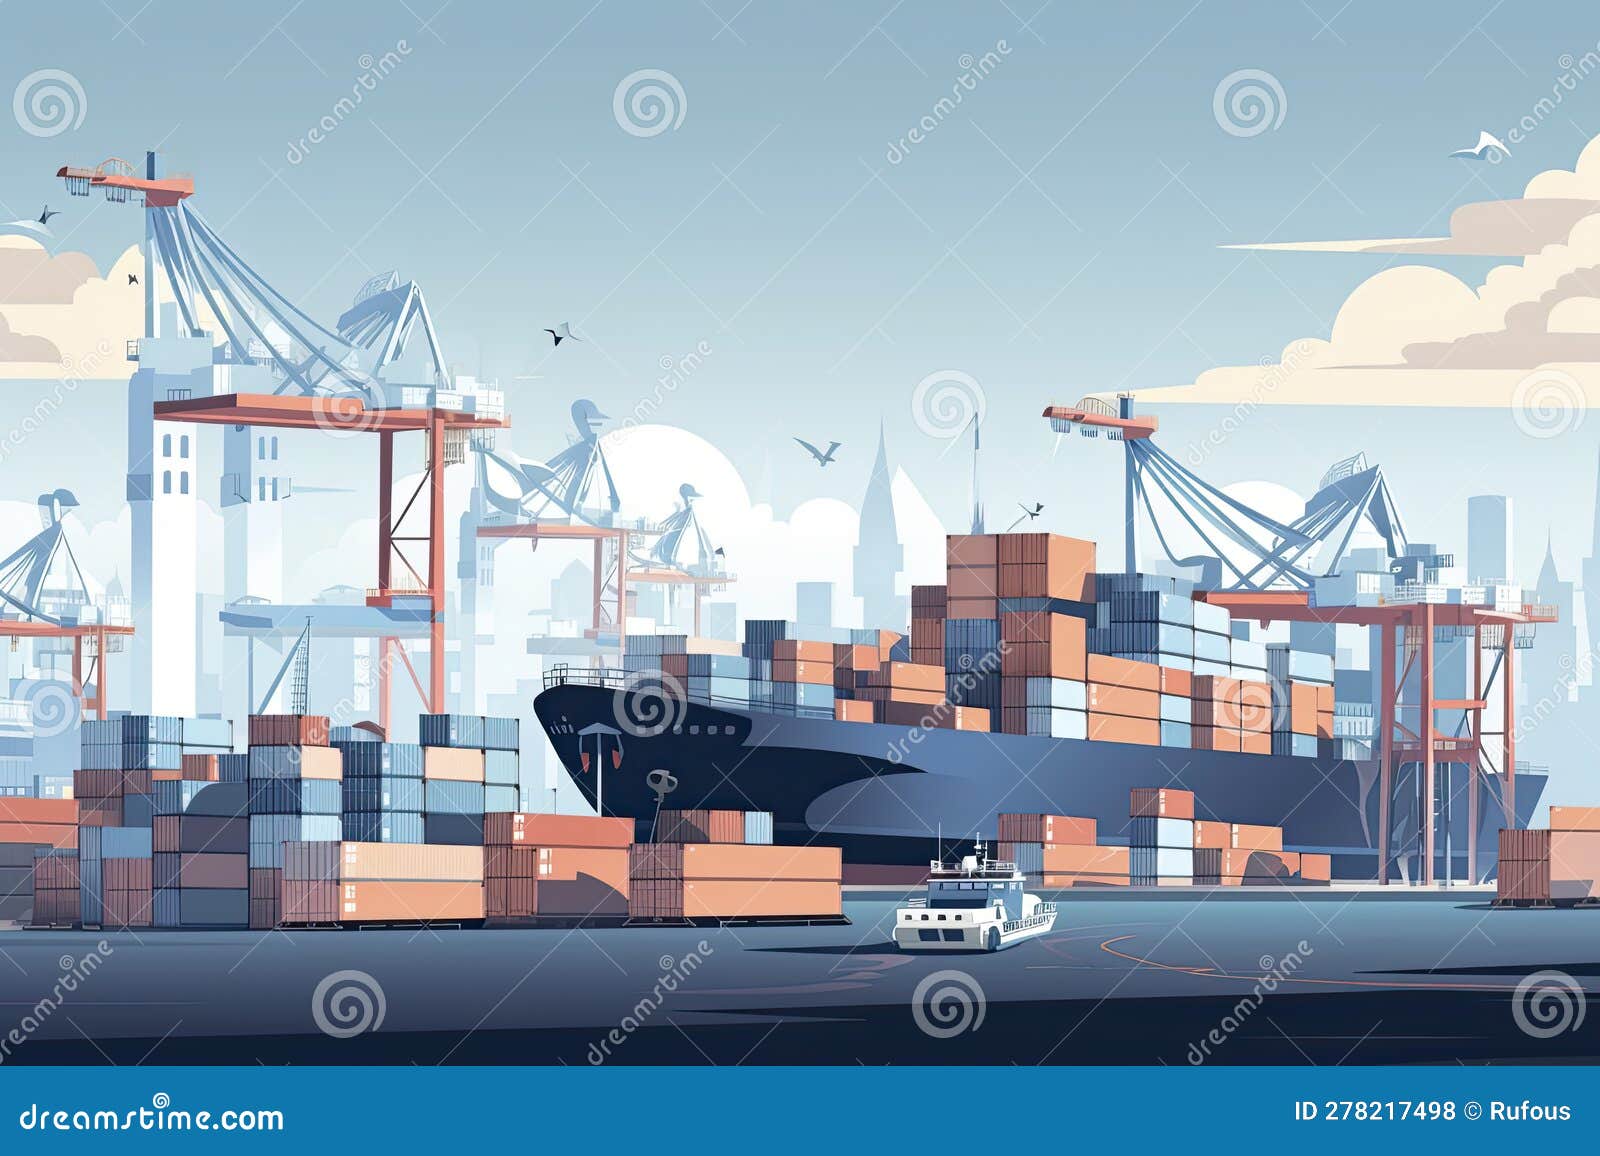 air transportation and transit of container ships loading and unloading in ports, transportes